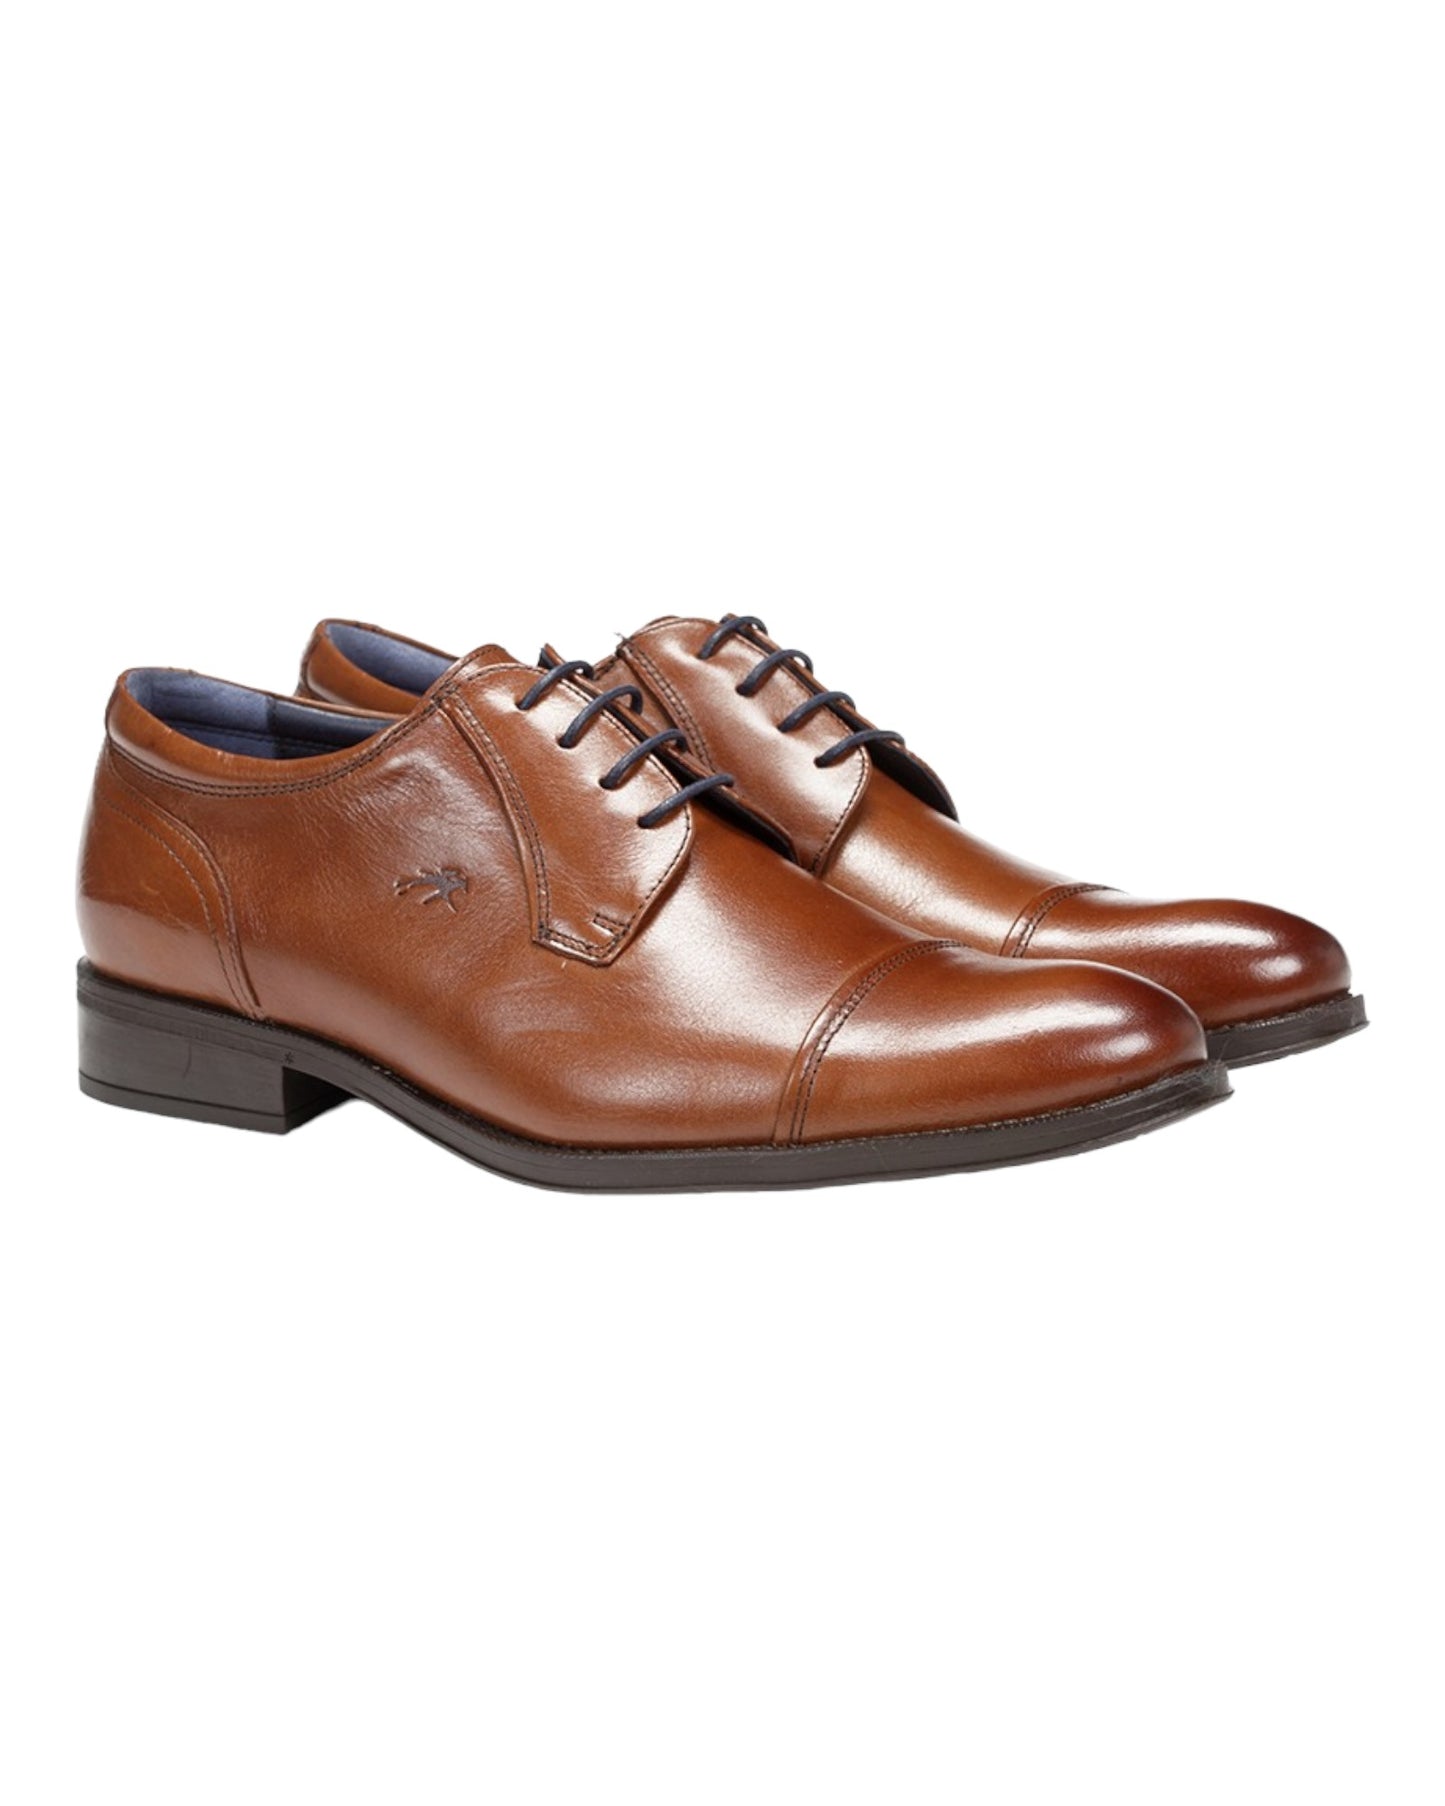 FLUHOS 8412 HERACLES LEATHER MEN'S SHOES